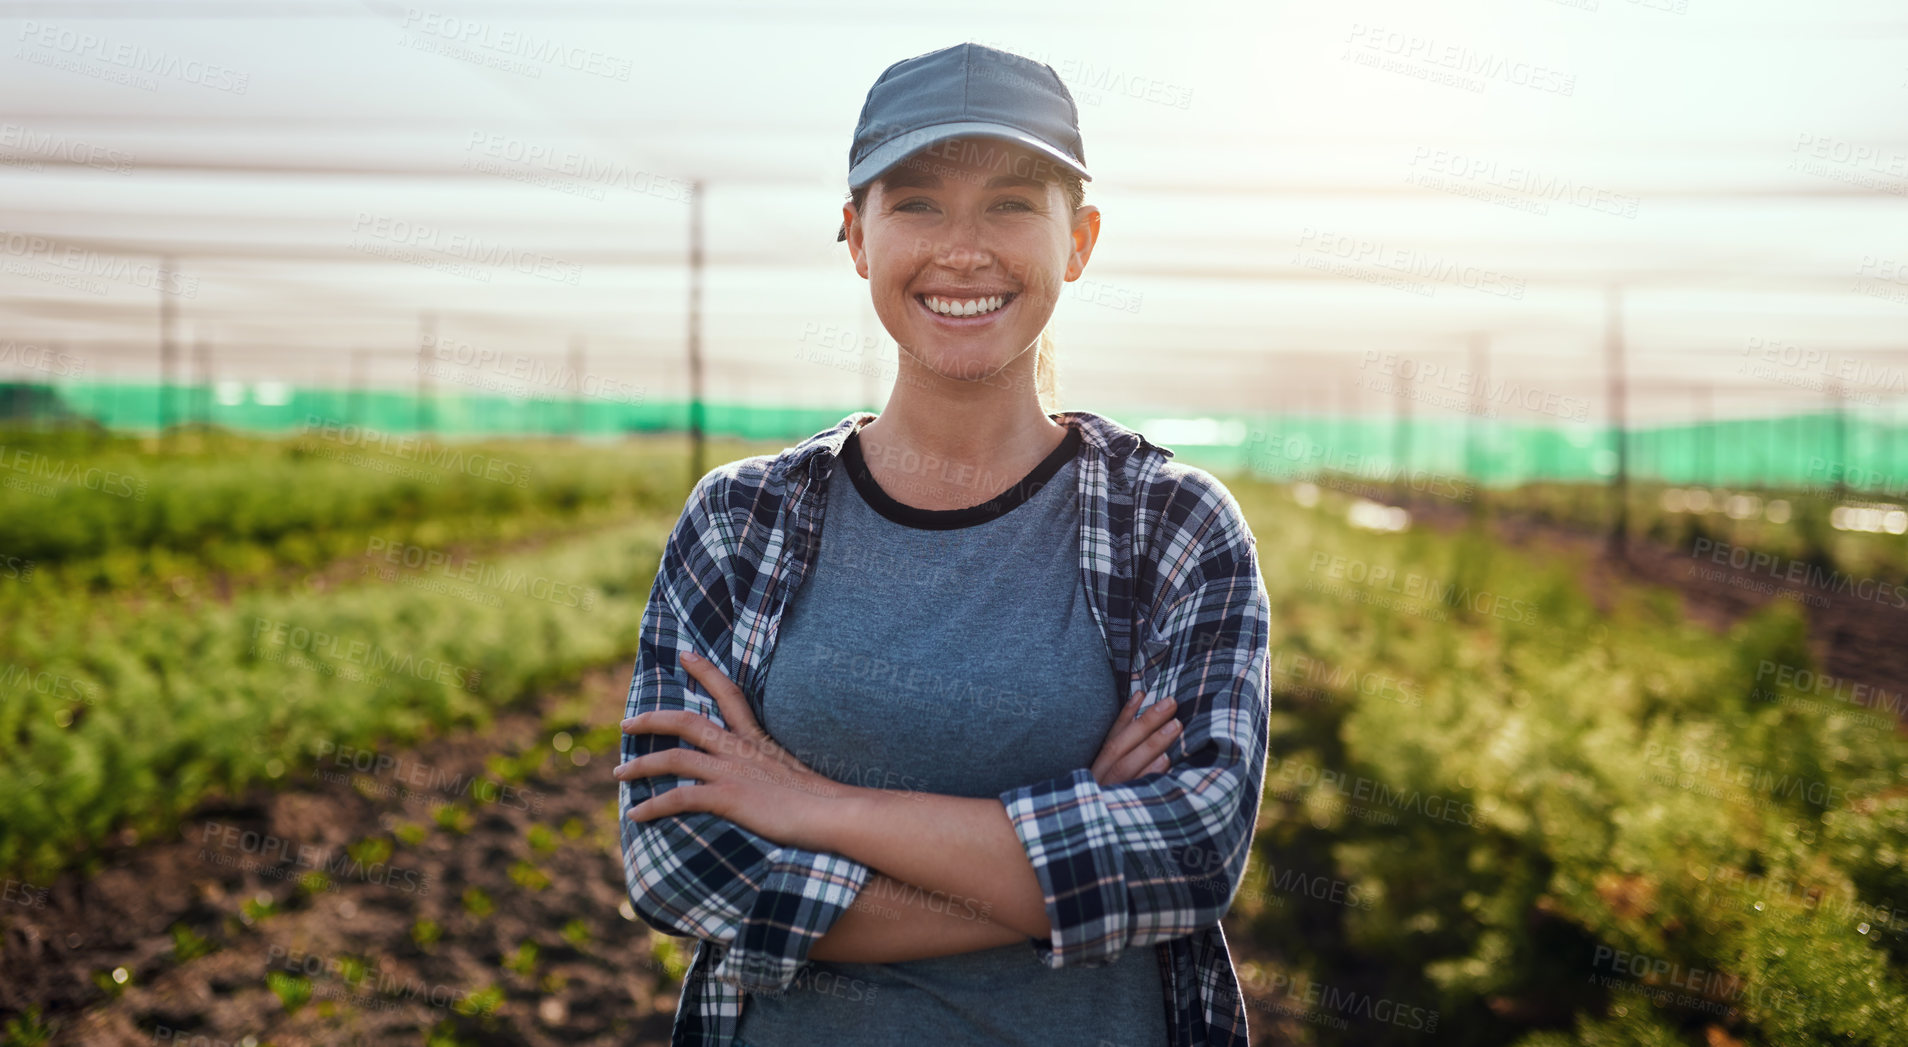 Buy stock photo Cropped portrait of an attractive young female farmer standing with her arms crossed while working on the farm